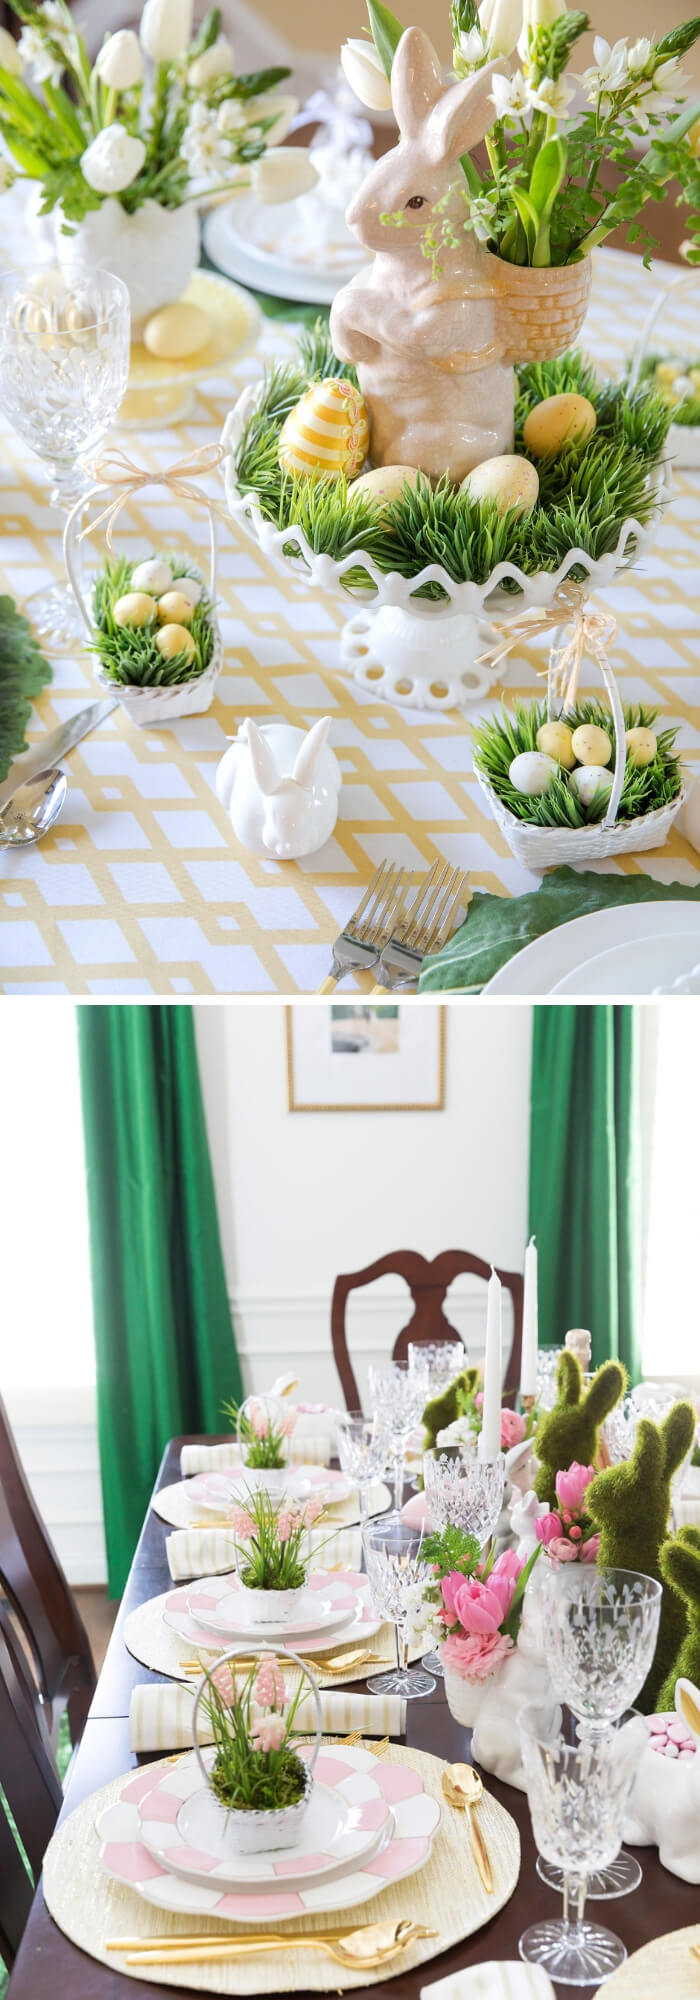 3 traditional easter decor